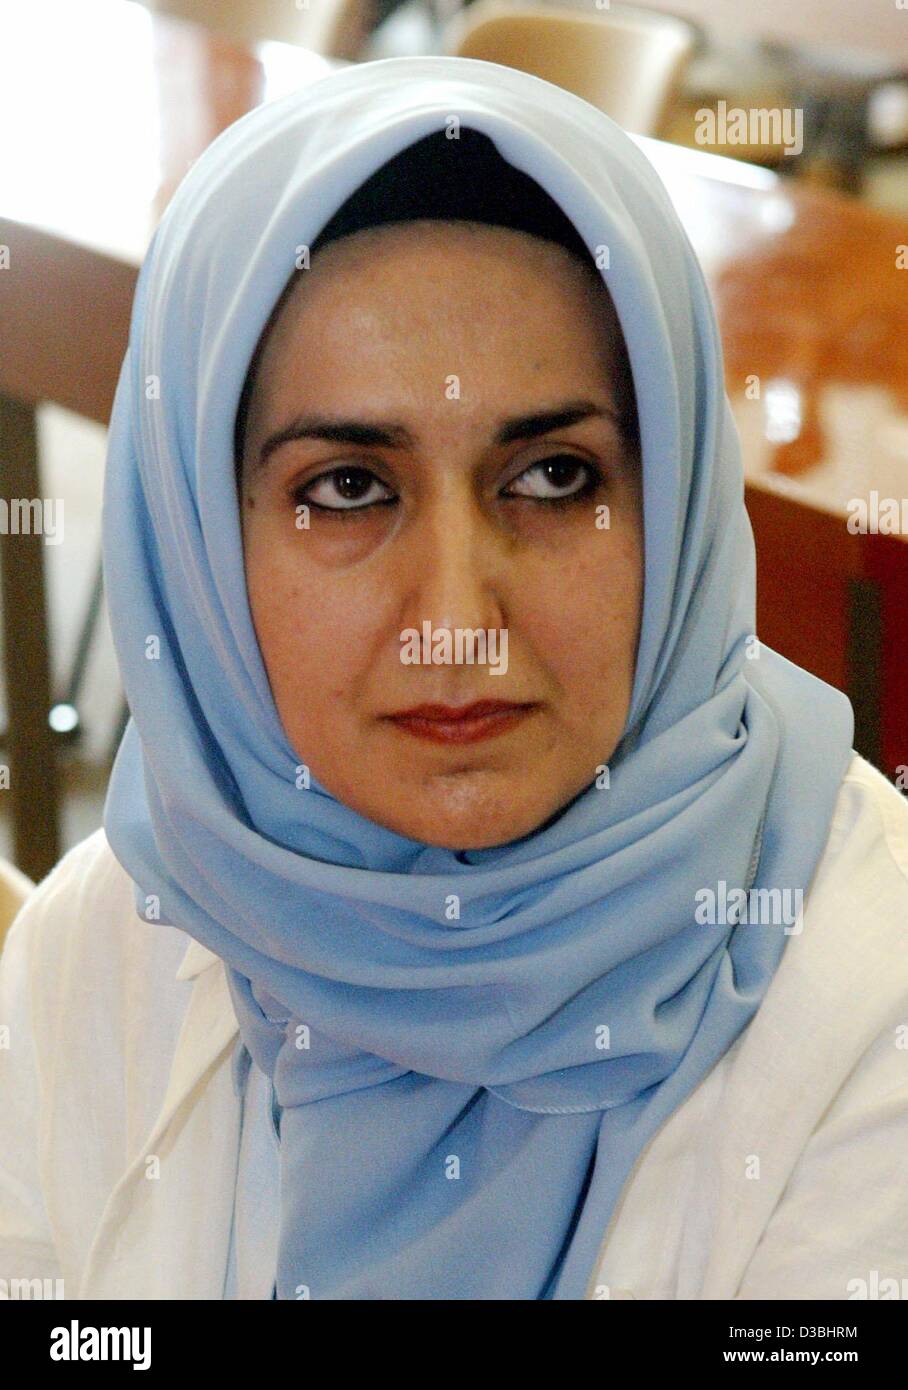 dpa) - Muslim teacher Fereshta Ludin wears her head scarf and sits in the  courtroom of the Constitutional Court in Karlsruhe, Germany, 3 June 2003.  The judges of the second senat of